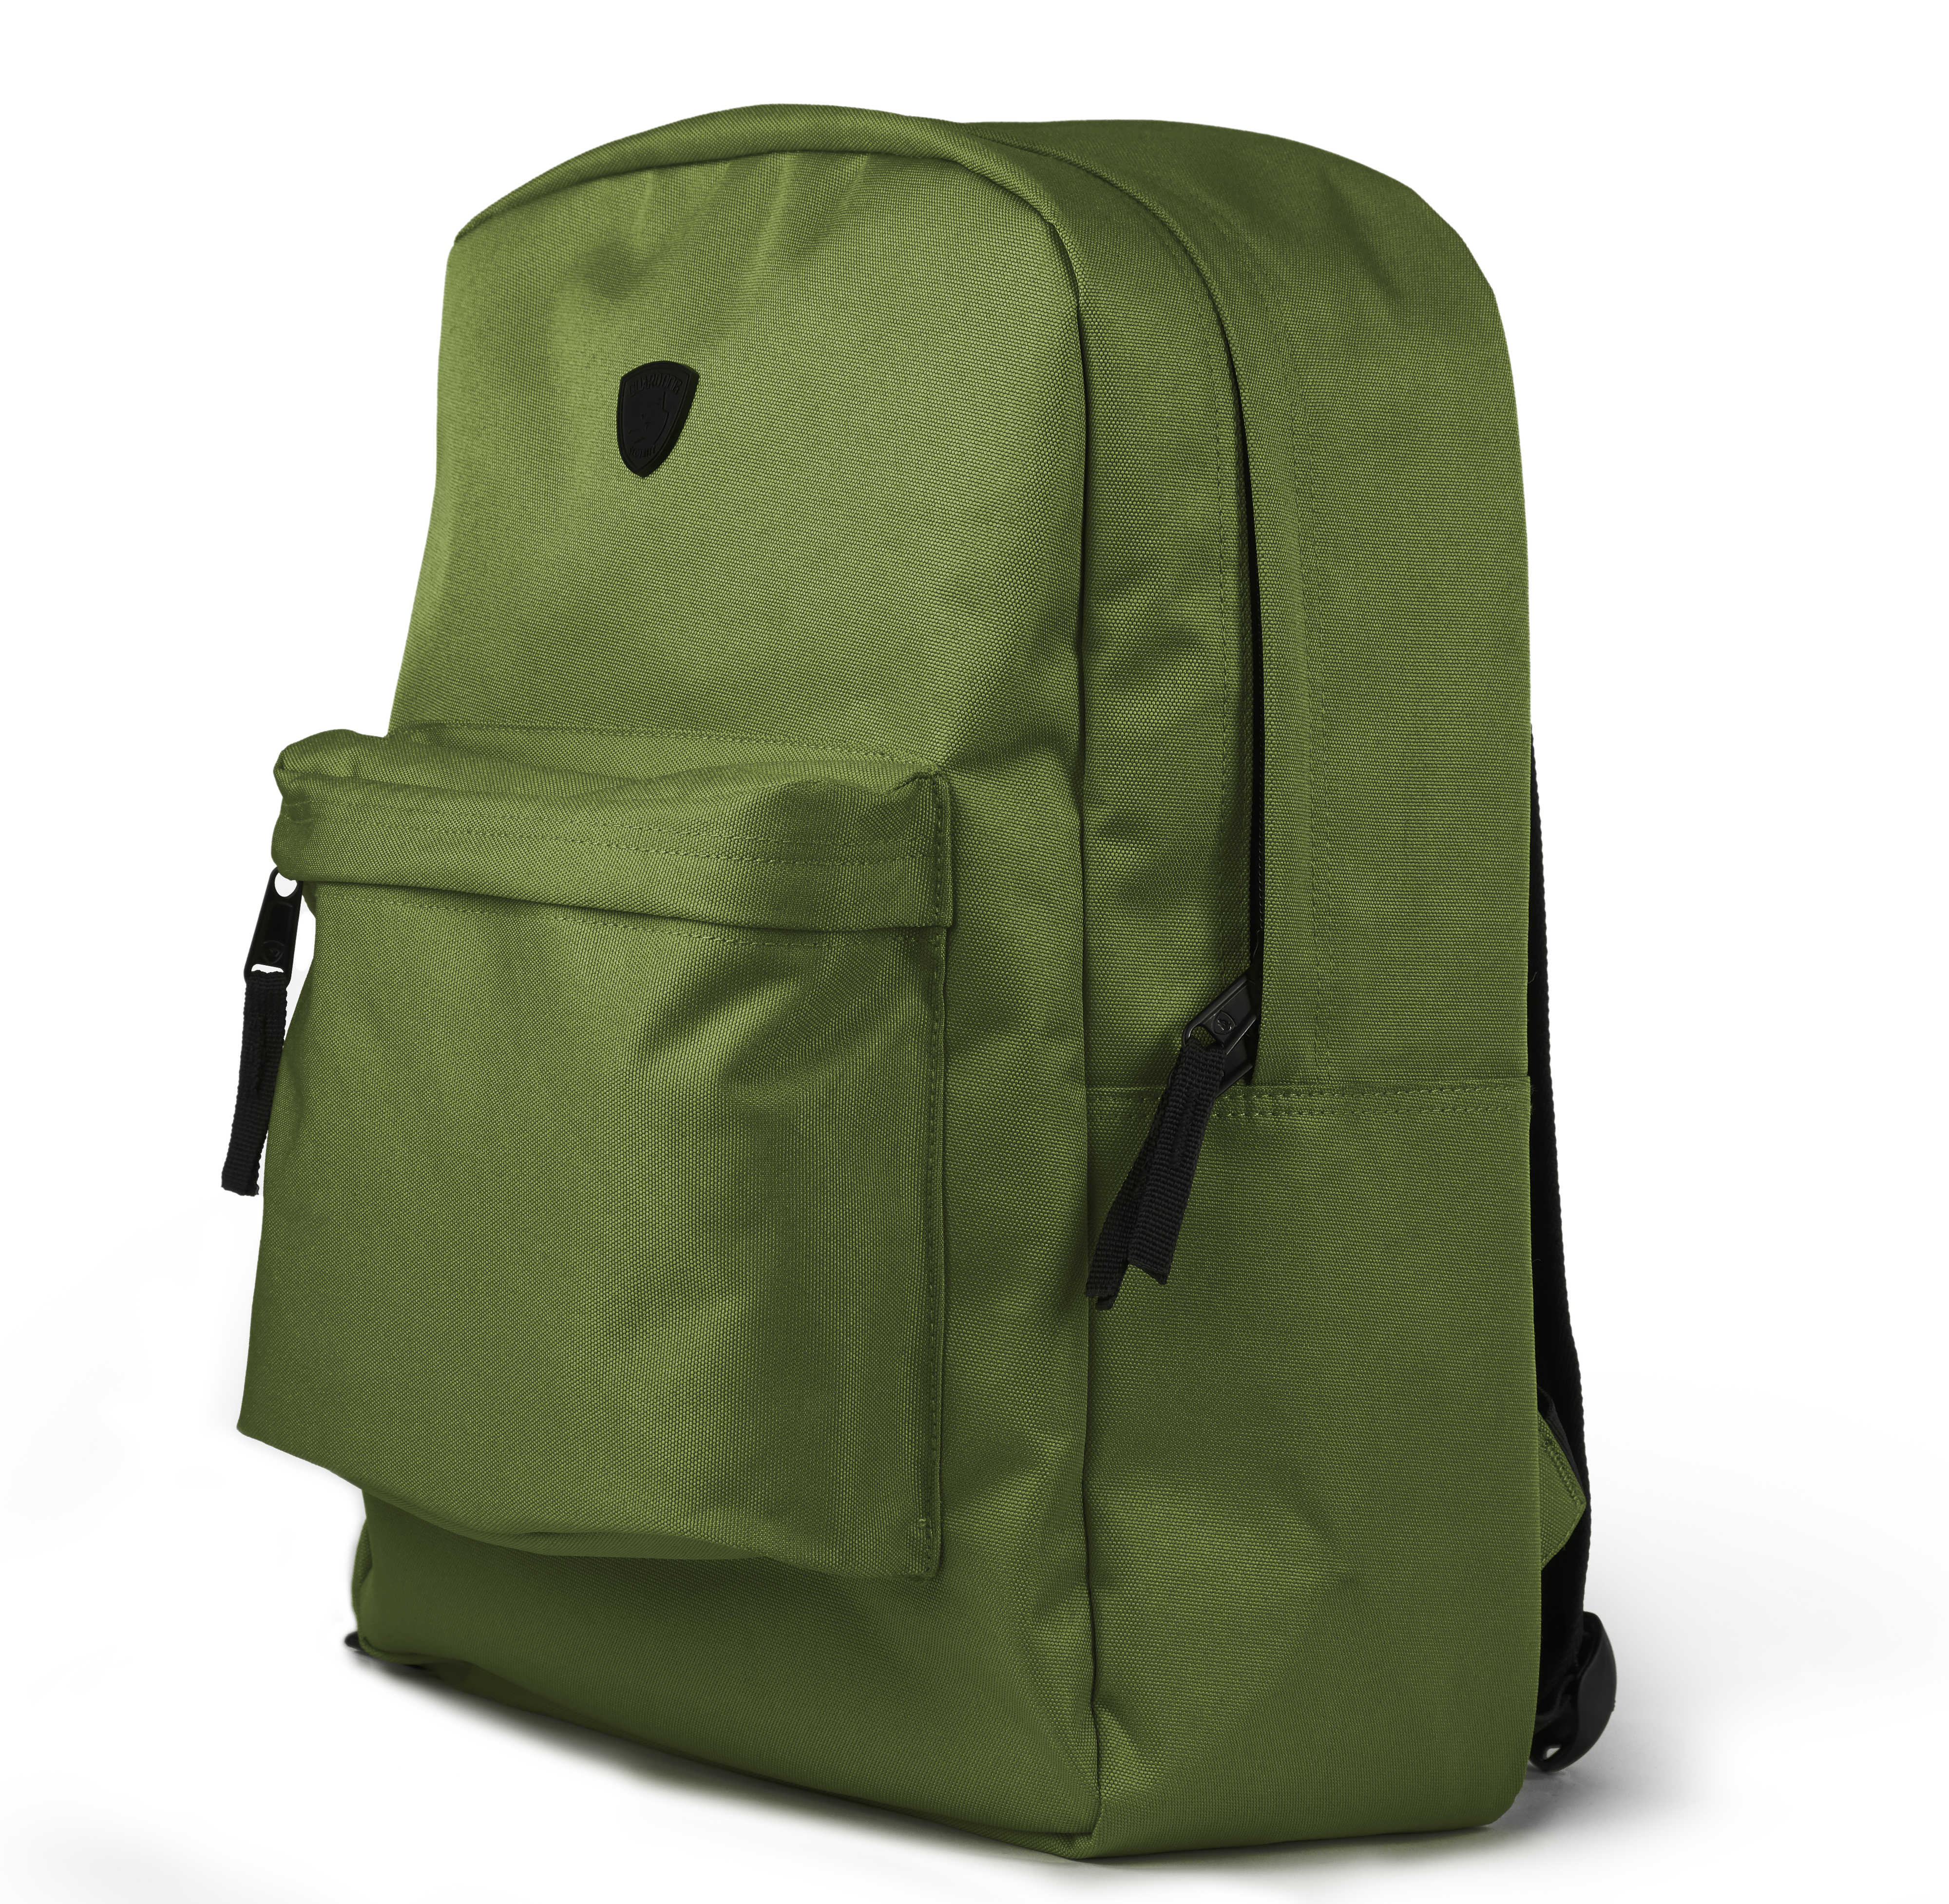 Proshield Scout - Bulletproof Backpack, Level IIIA, Youth Edition (Green)